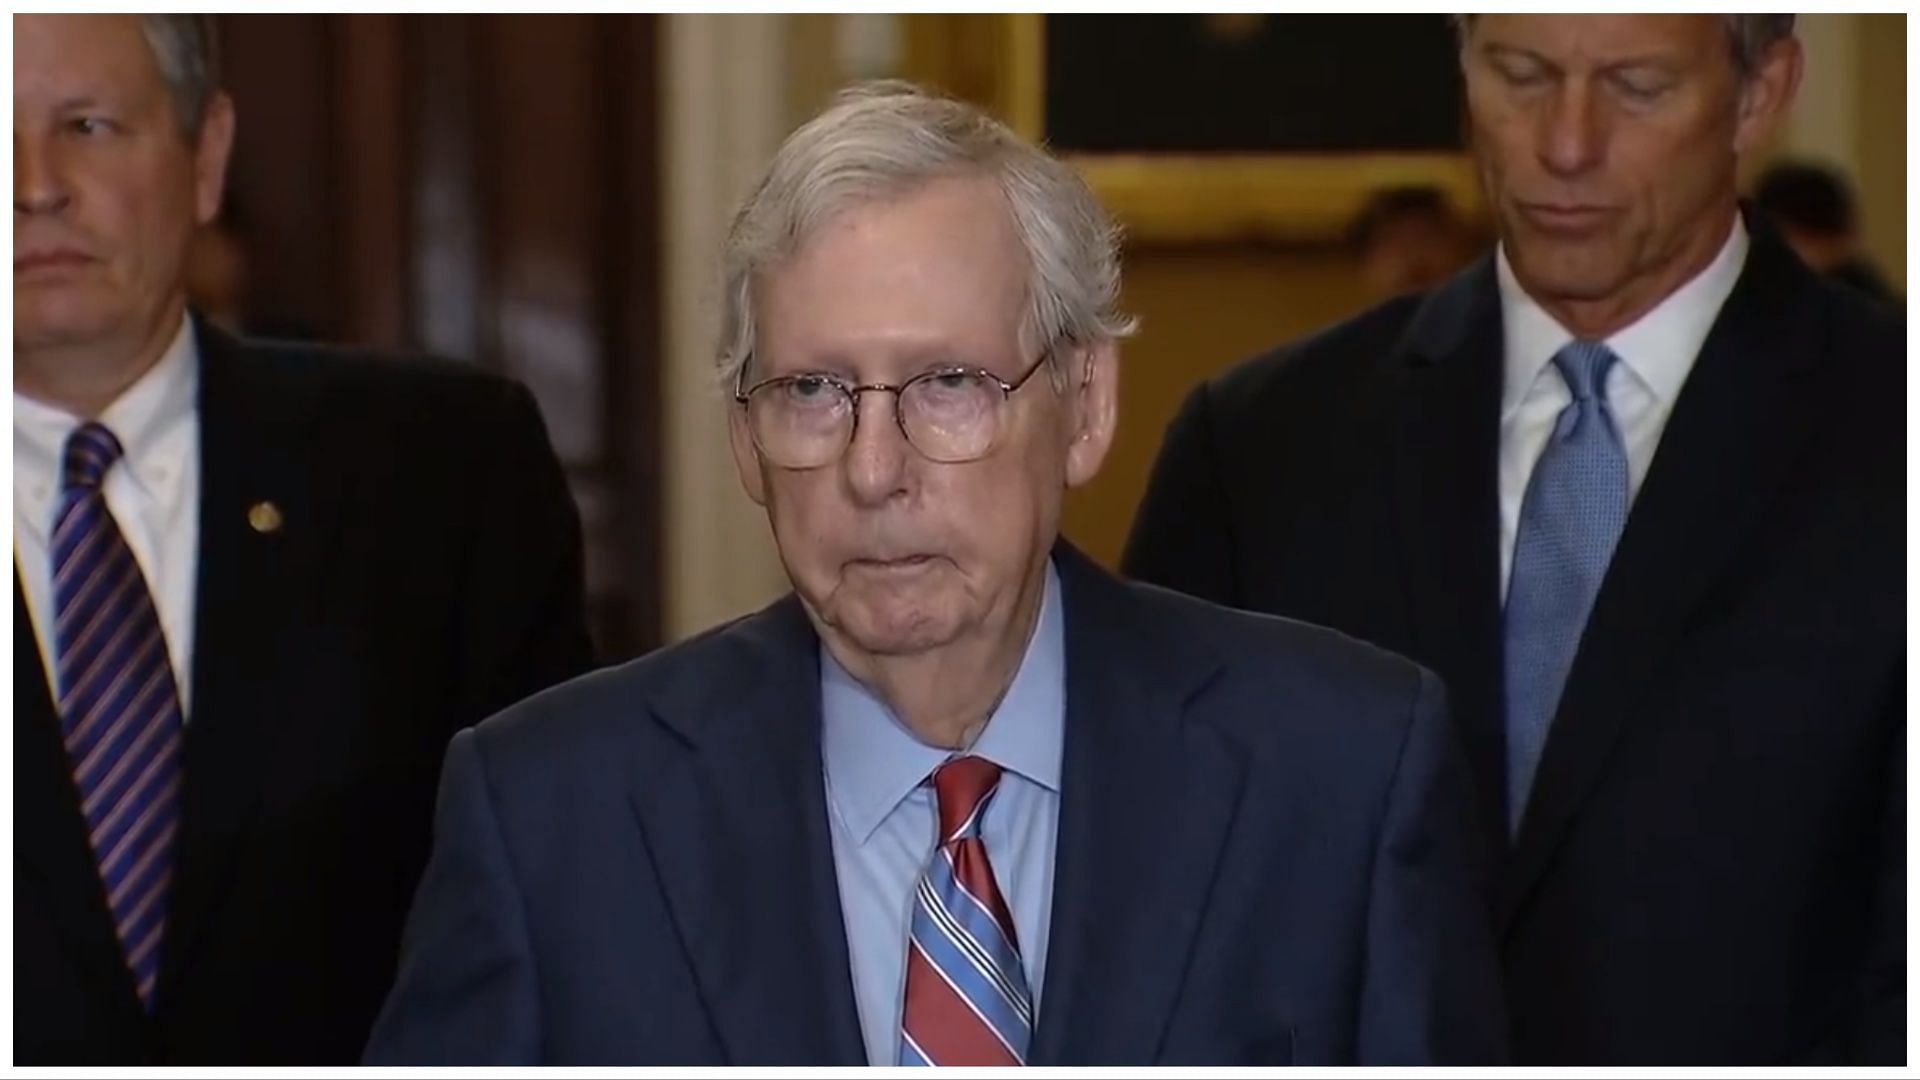 Senator Mitch McConnell had a long bizarre pause in the middle of a press conference speech (Image via Twitter/@RaquelMartinTV)